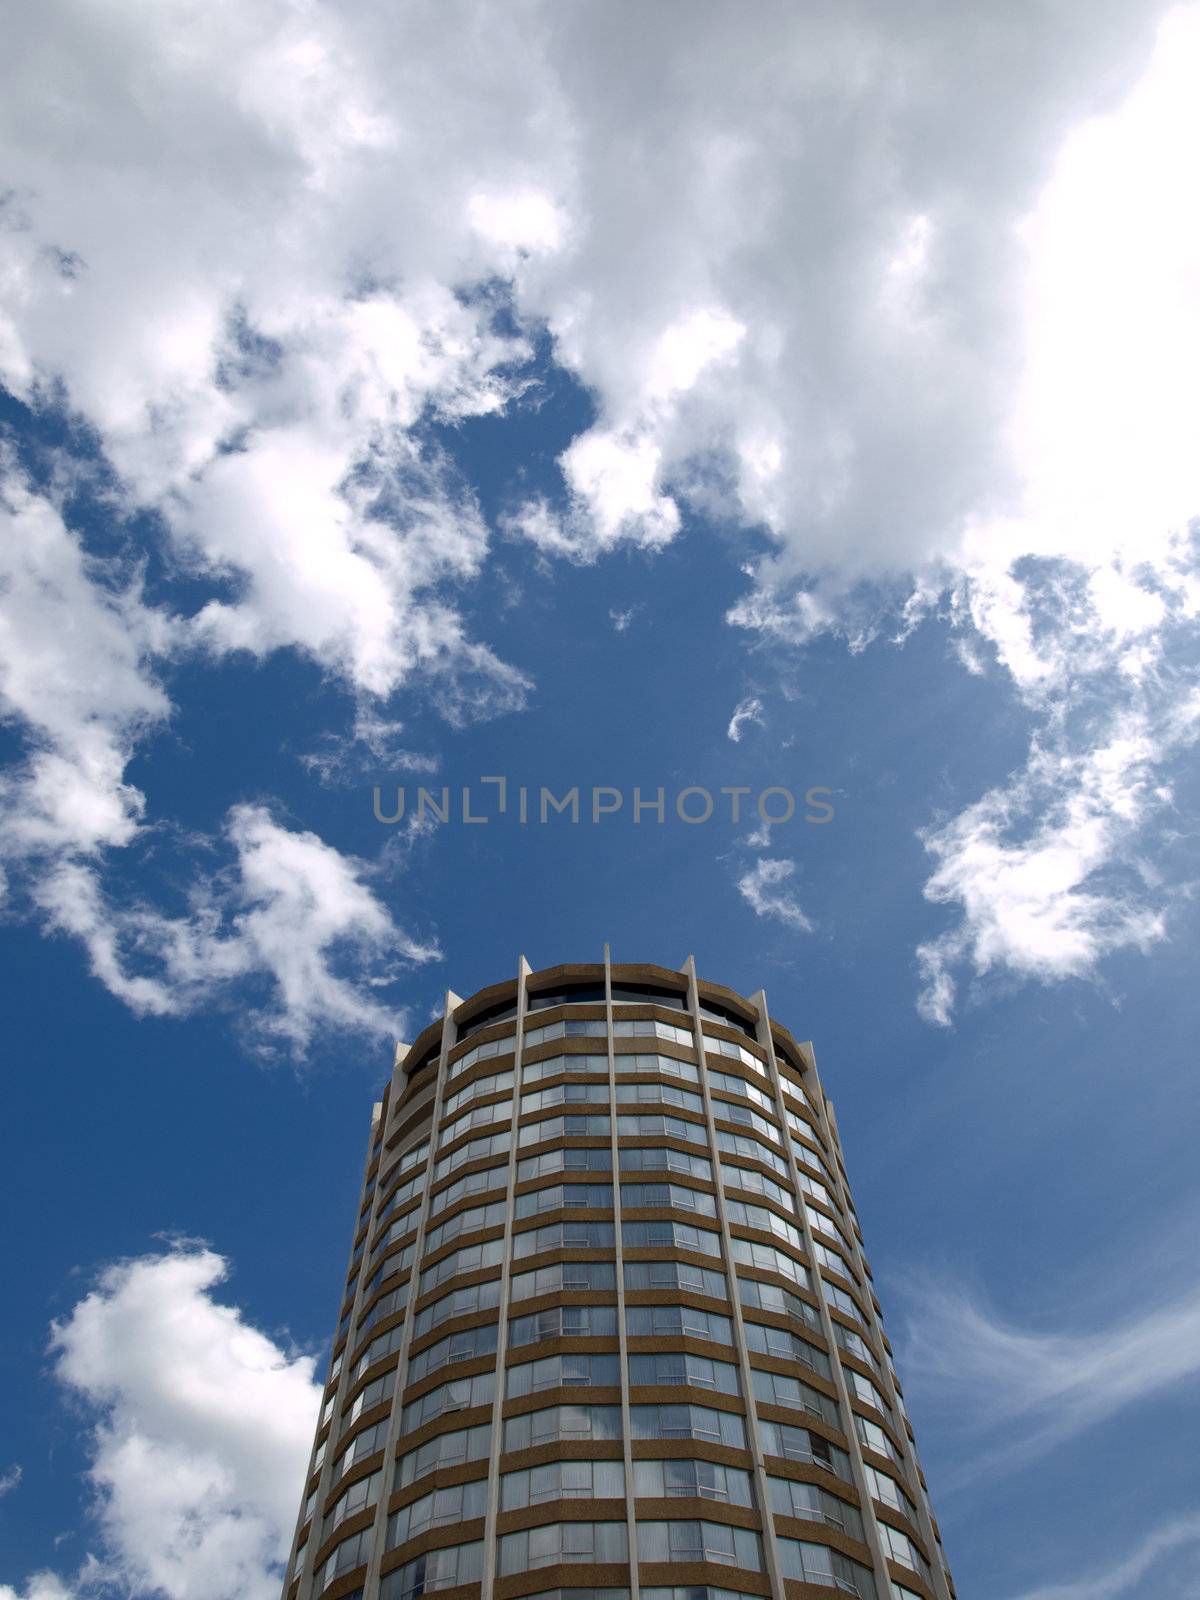 Cylindrical building piercing the cloudy blue sky.